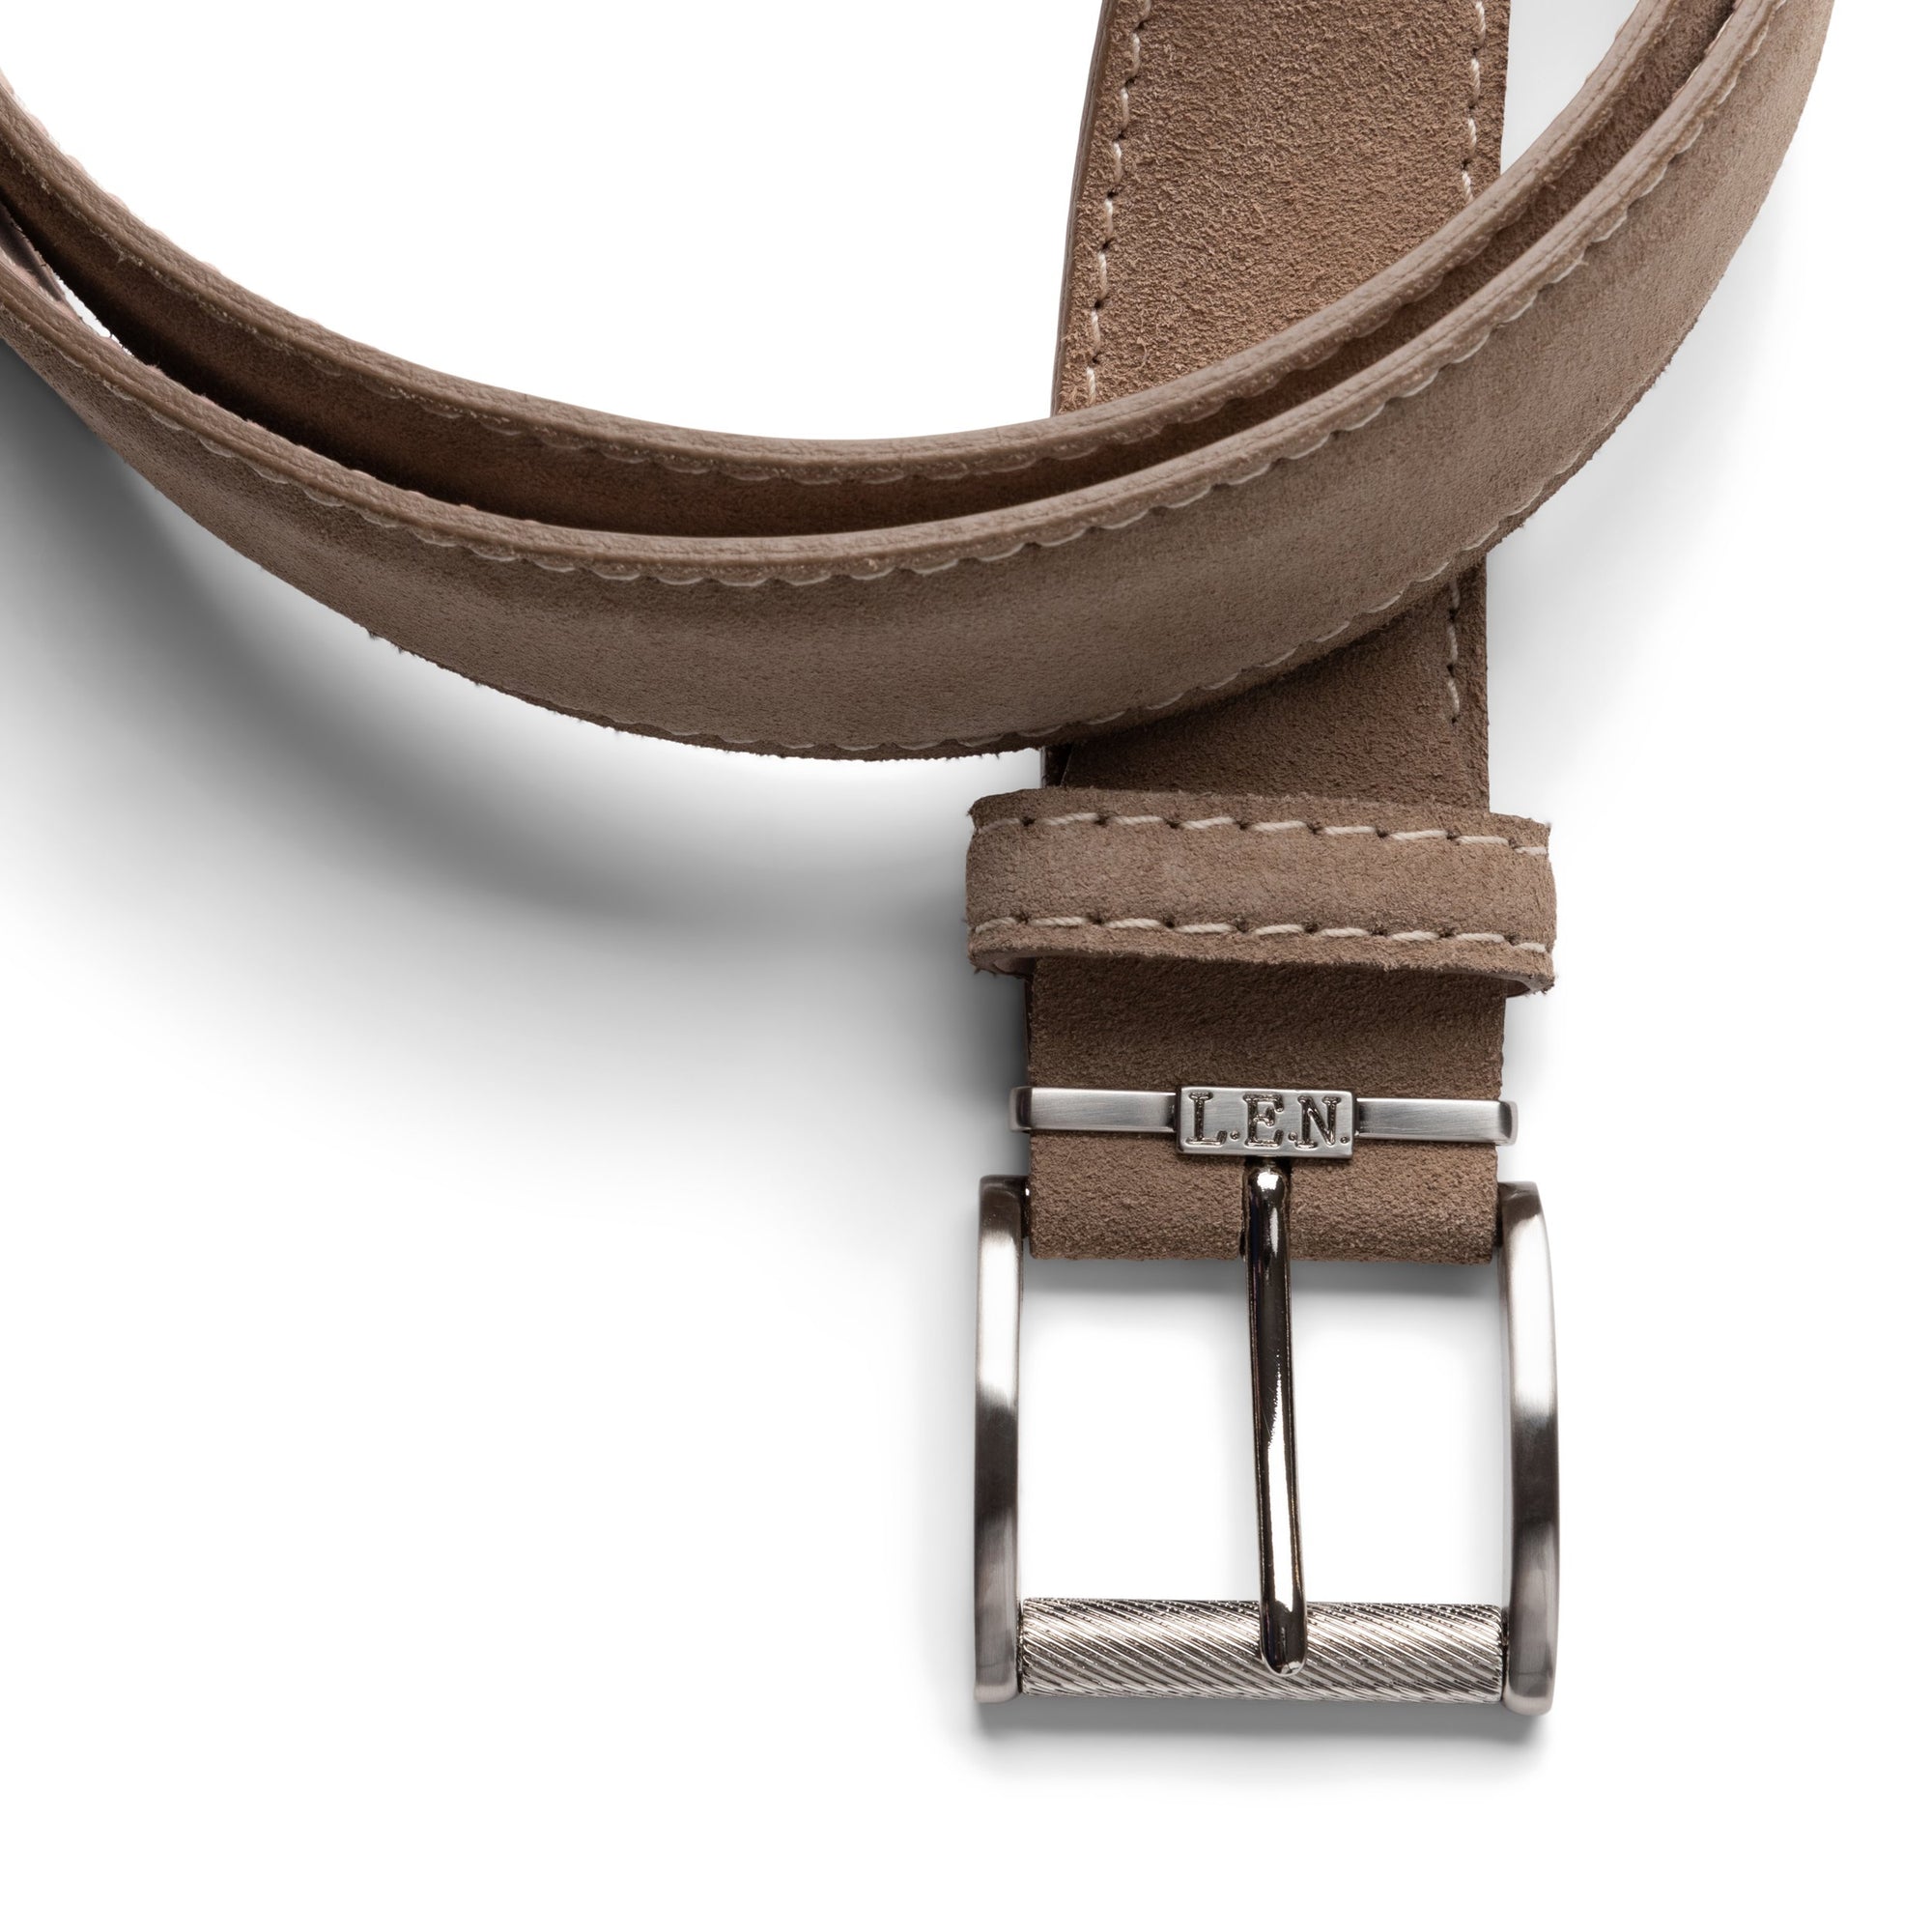 Italian Suede Belt in Fawn with Beige Stitching by L.E.N. Bespoke